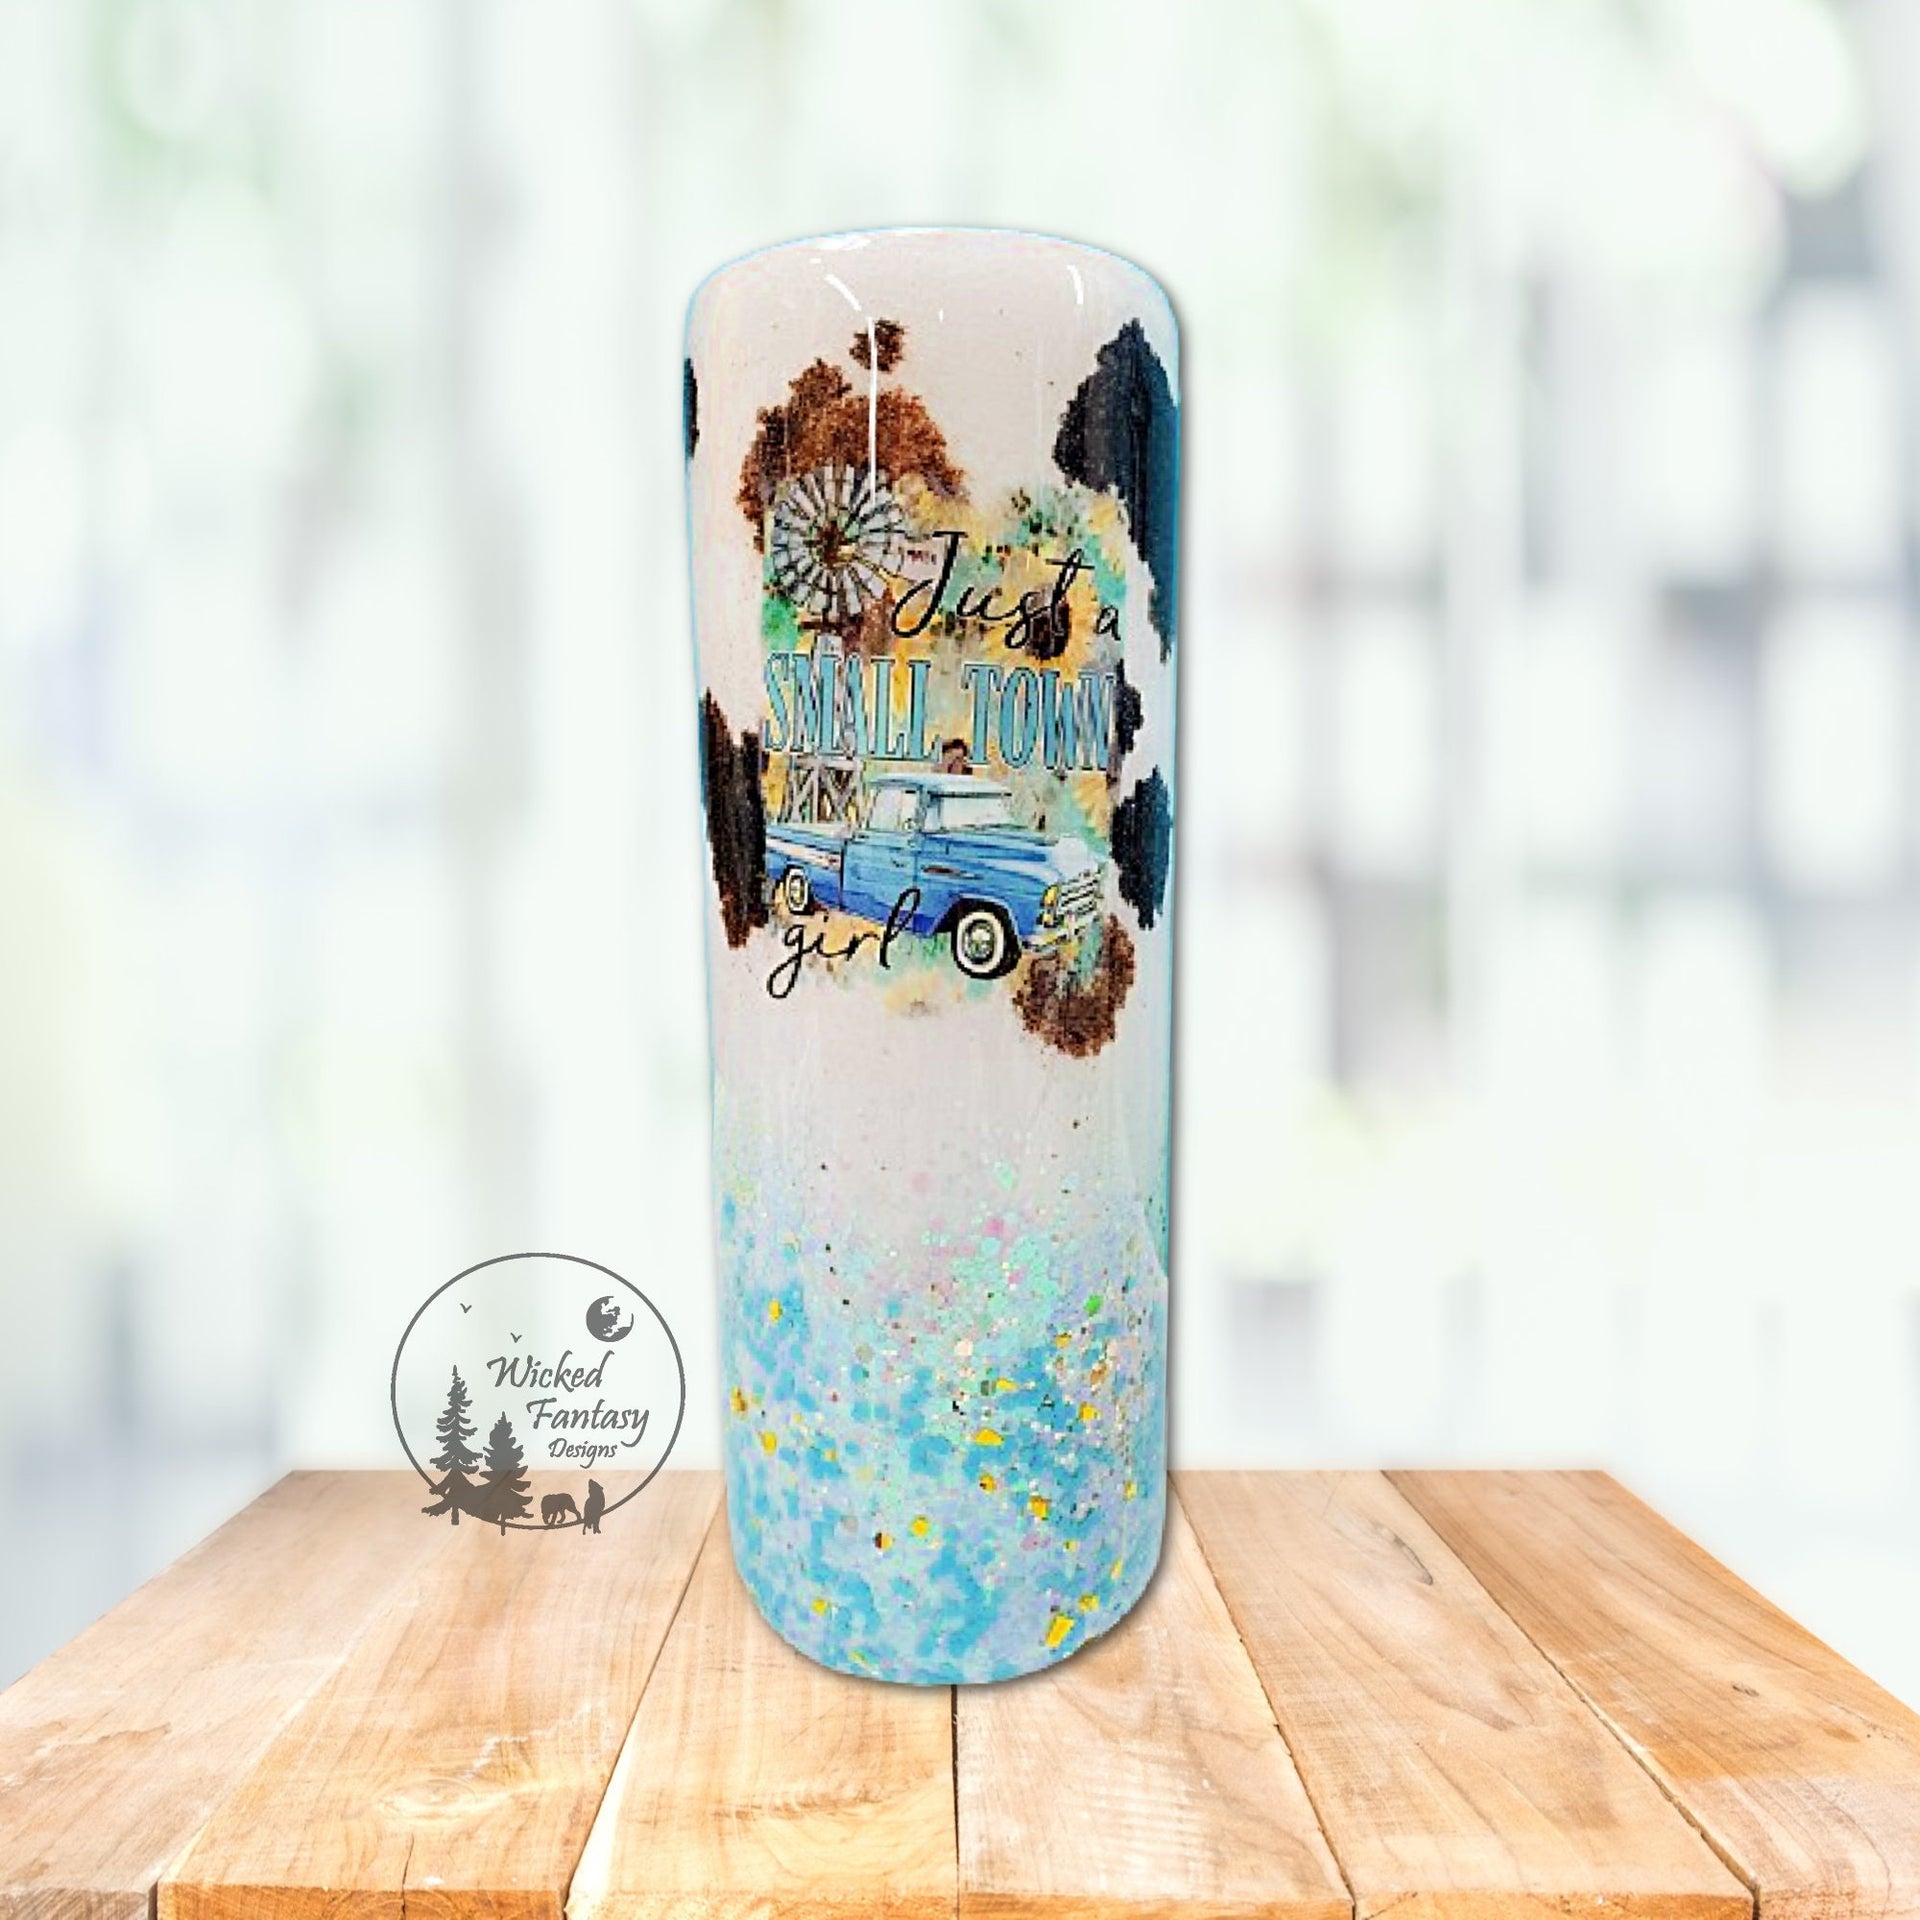 How to Prep a Tumbler for Epoxy and Glitter